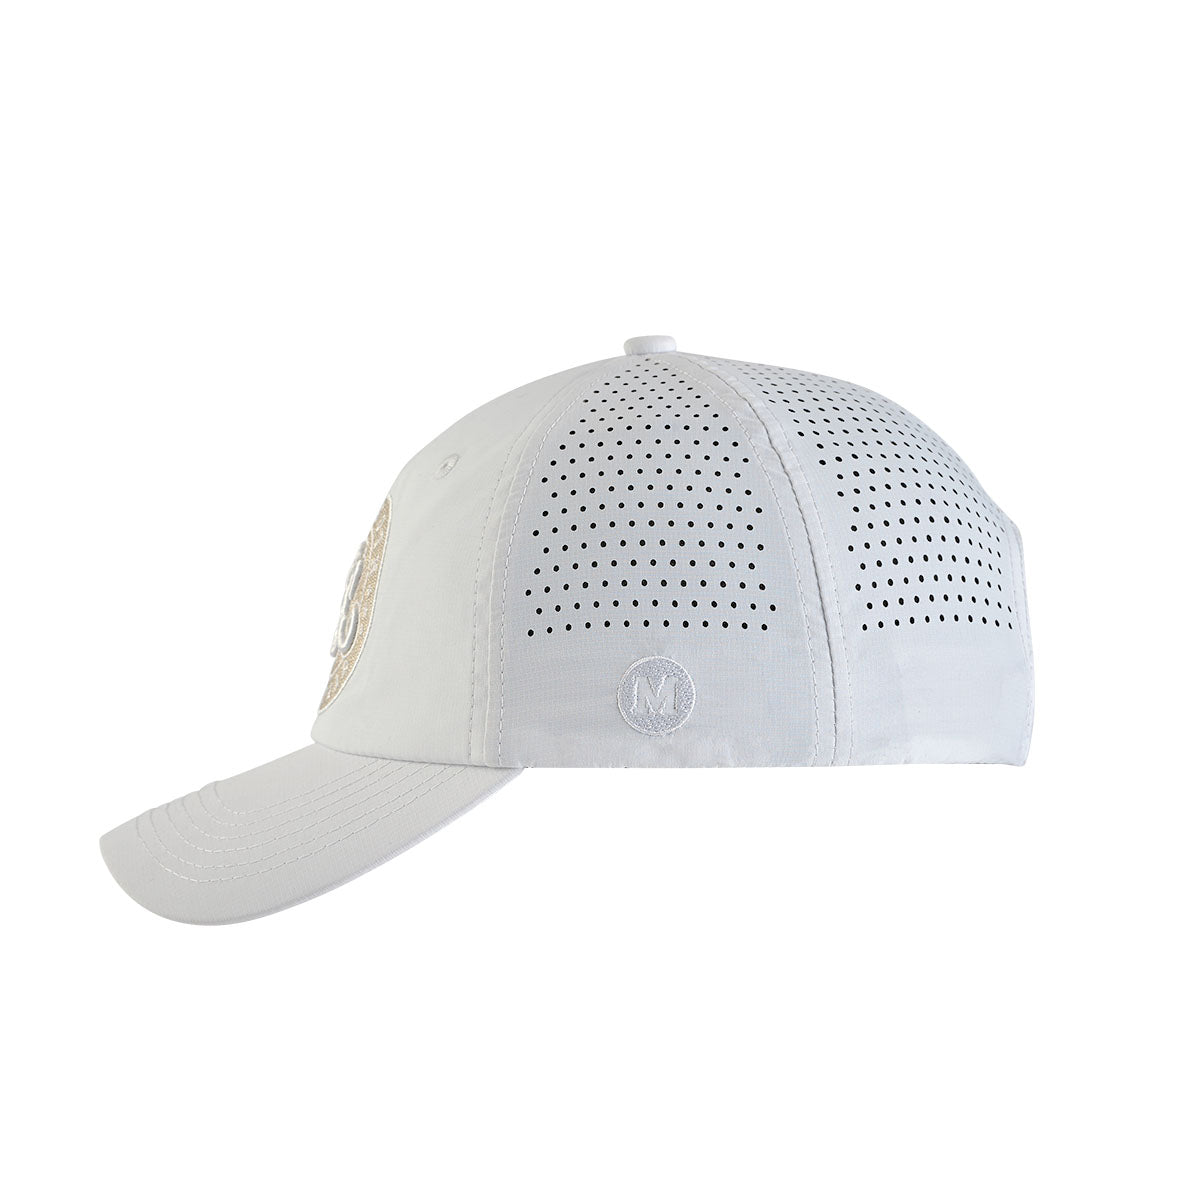 - Finest Performance Headwear Snapback - Classic Mammoth White at Its